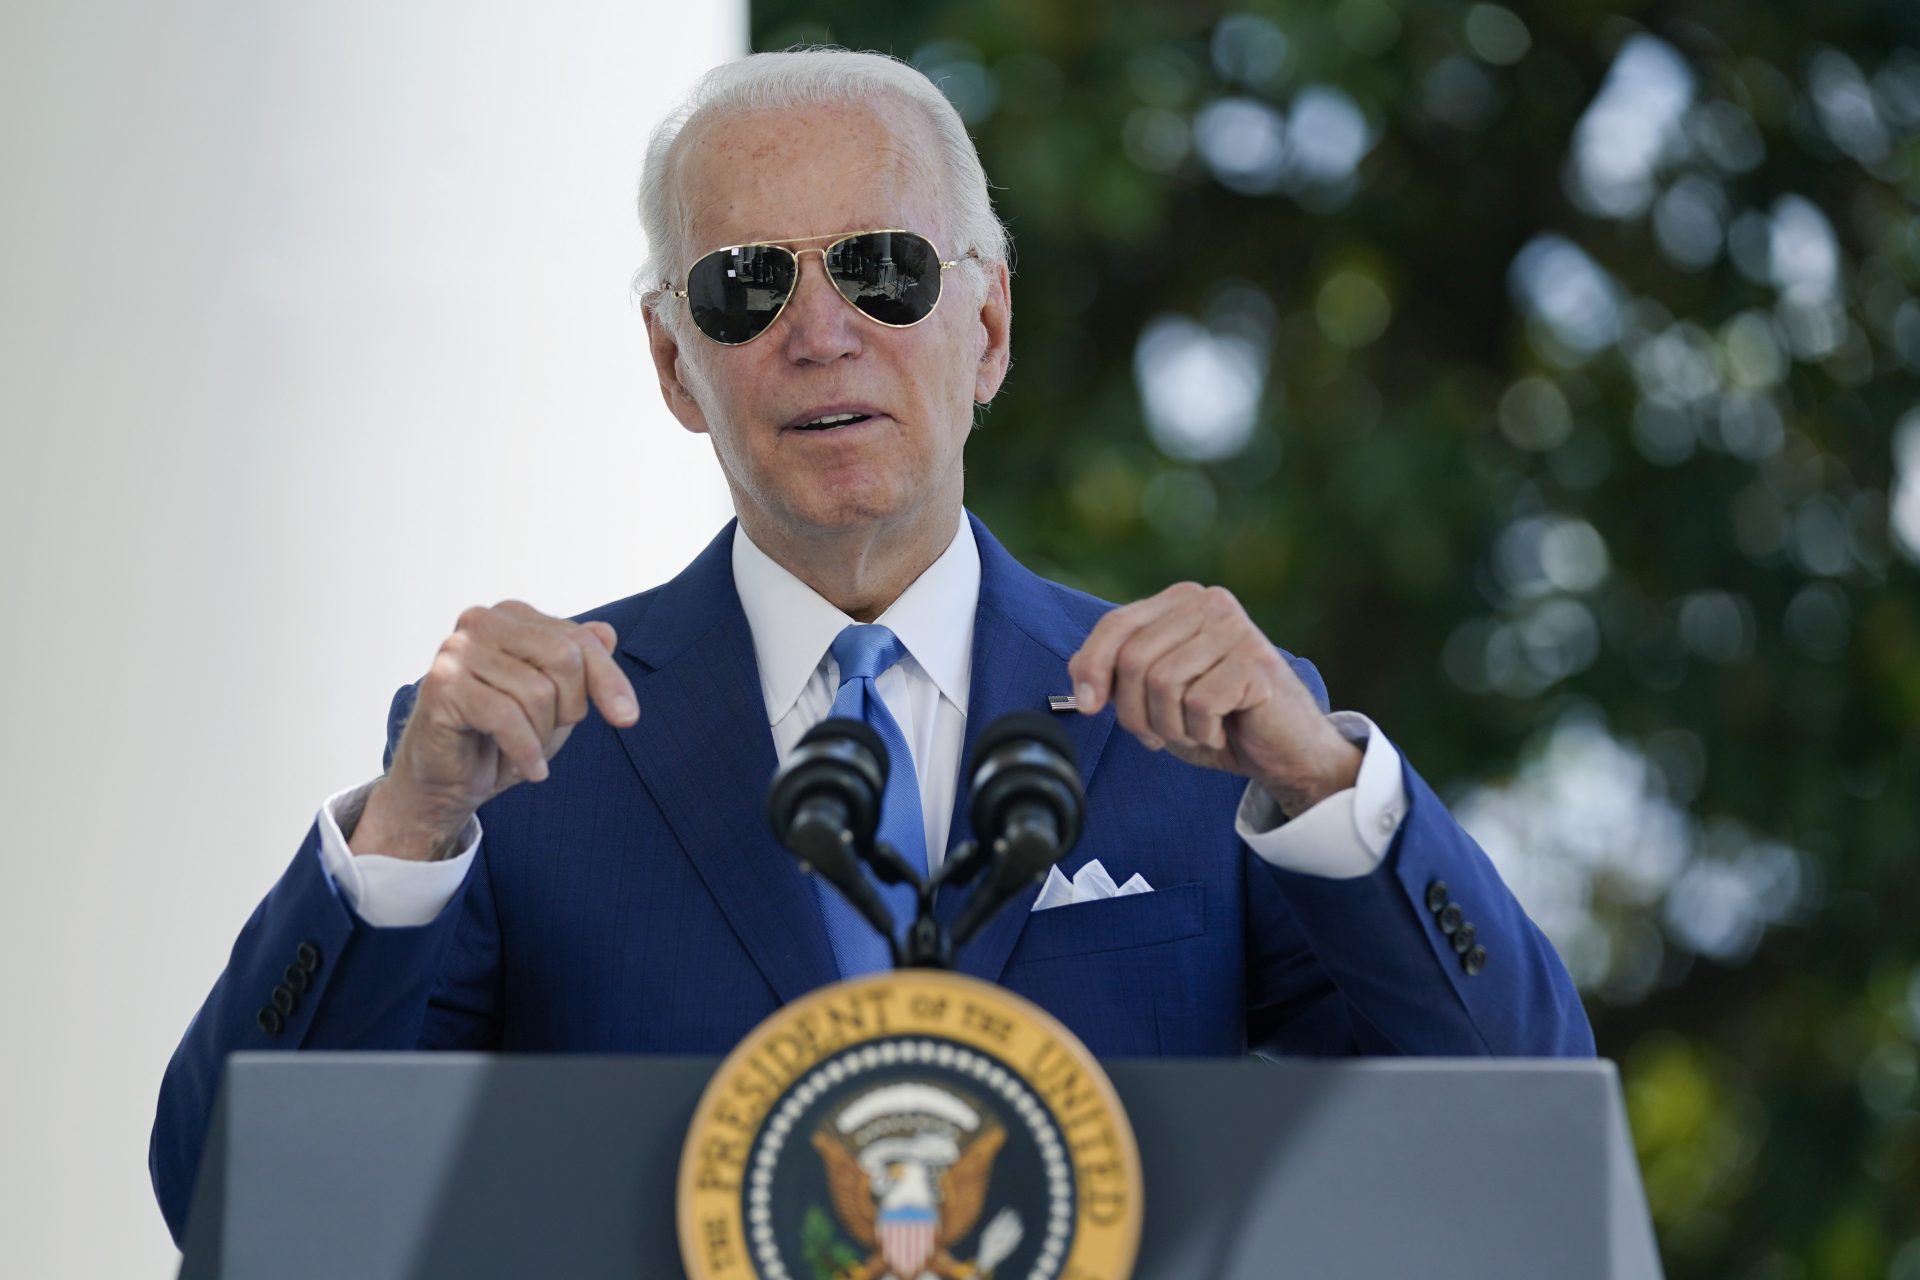 President Joe Biden signed into law two bipartisan bills to help tackle those who cheated during the pandemic.